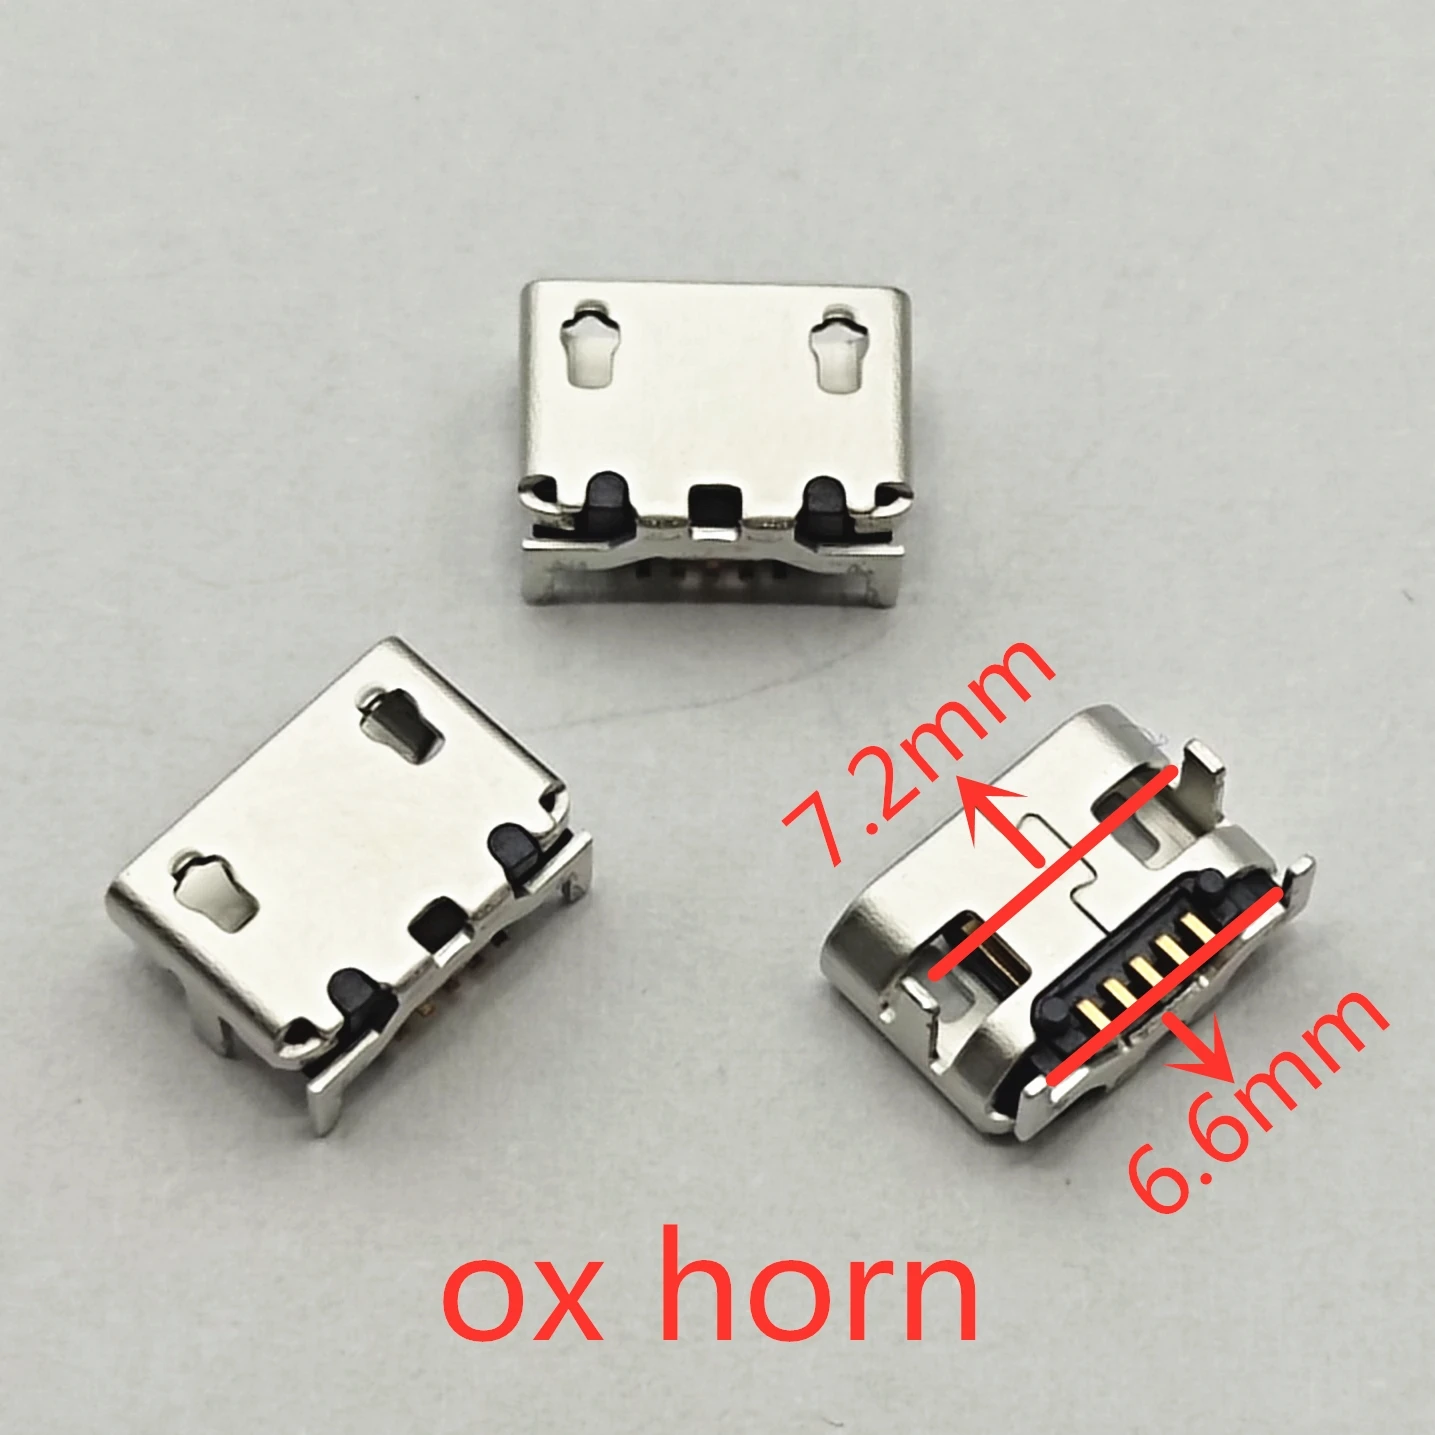 

50pcs for Micro USB Connector Ox horn 7.2/6.6mm 5pin DIP4 Mini usb Connector Four legs For Mobile phone charging tail socket